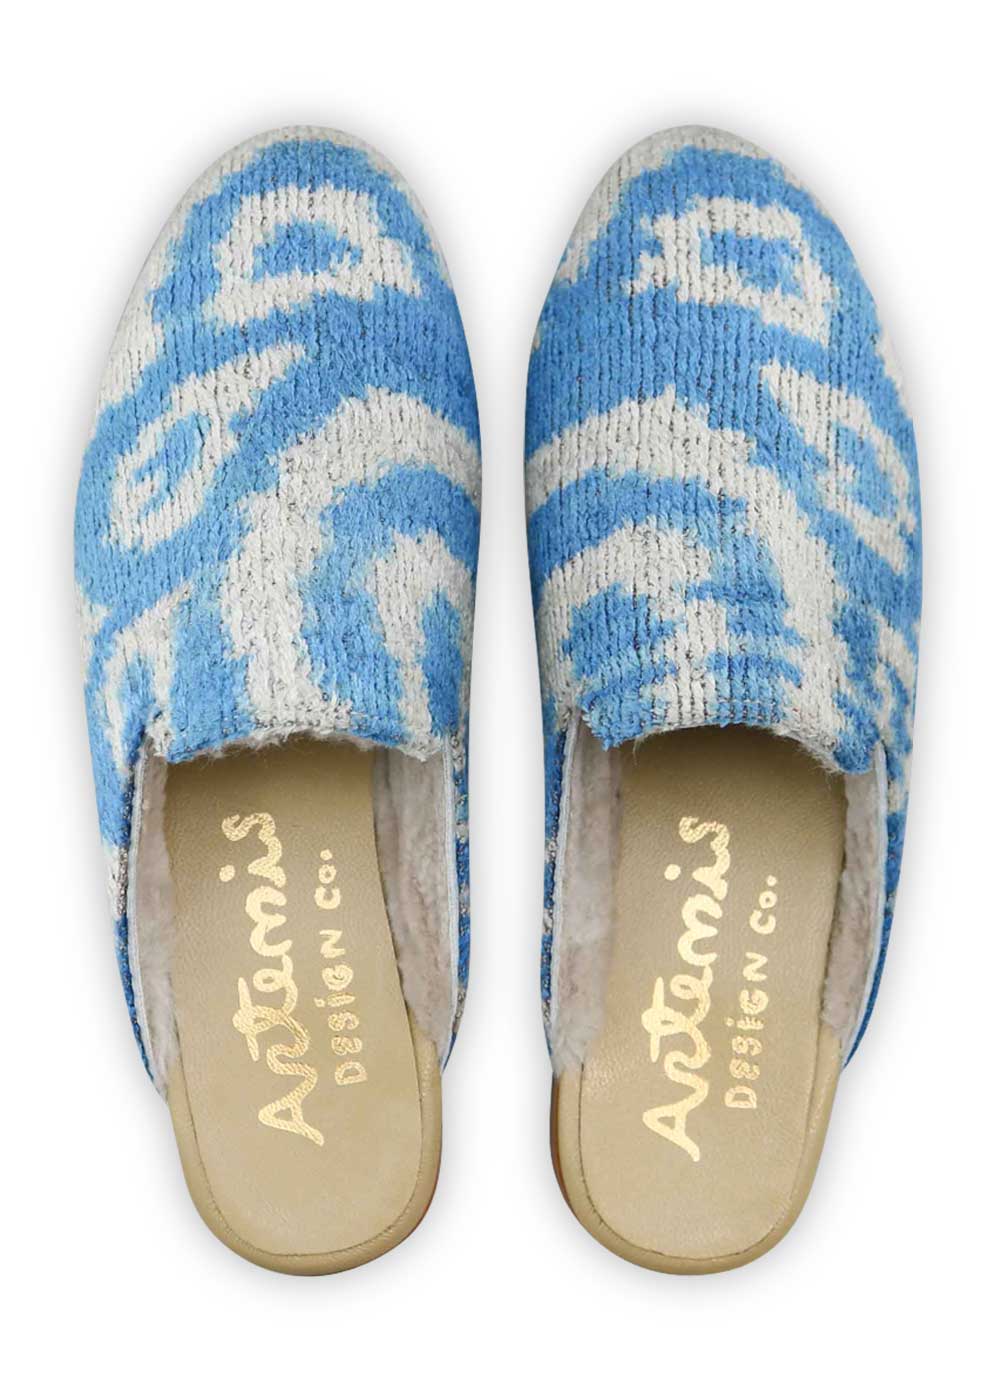 Artemis Design Co Women's Shearling-Lined Velvet Slippers in a chic color combination of white and powder blue offer a luxurious and stylish footwear option. Crafted with attention to detail, these slippers feature a plush shearling lining for warmth and comfort. The velvet exterior exudes elegance, and the white and powder blue color palette adds a touch of sophistication. (Front View)